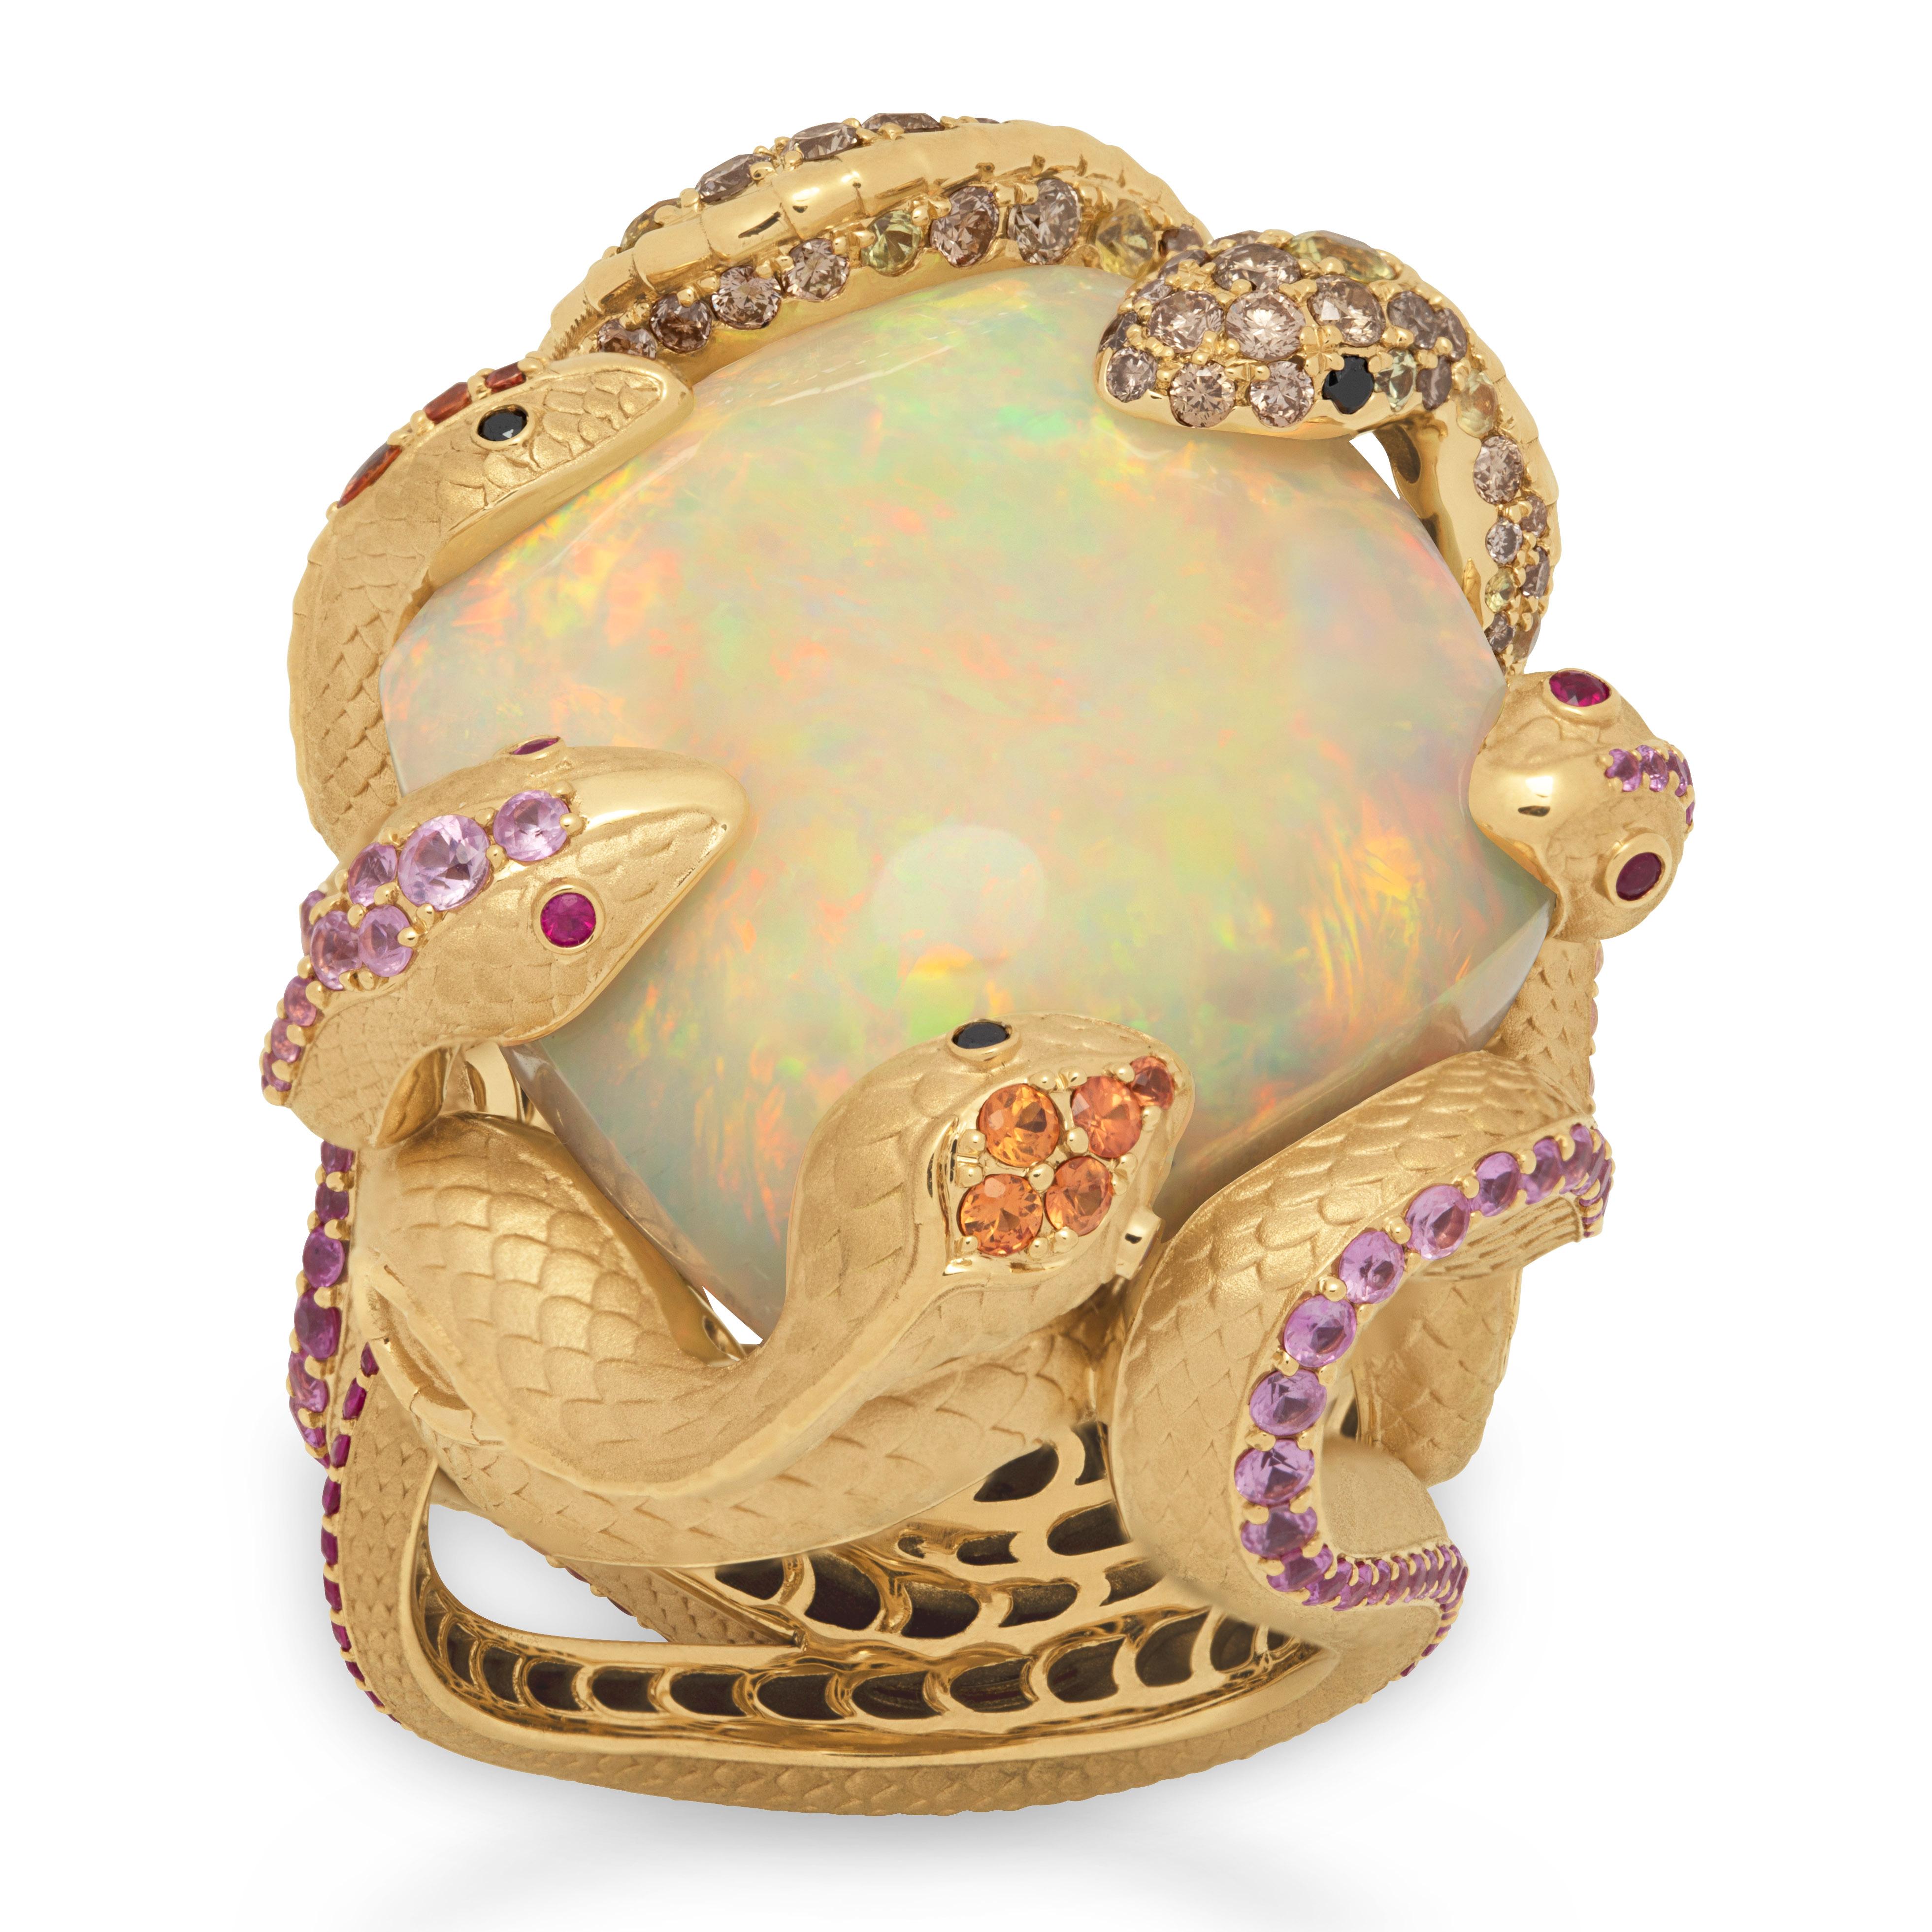 Opal 23.33 Carat Diamond Sapphire 18 Karat Yellow Gold Snake Ring
The Snake is the first to be met by the Little Prince from St. Exupery's 